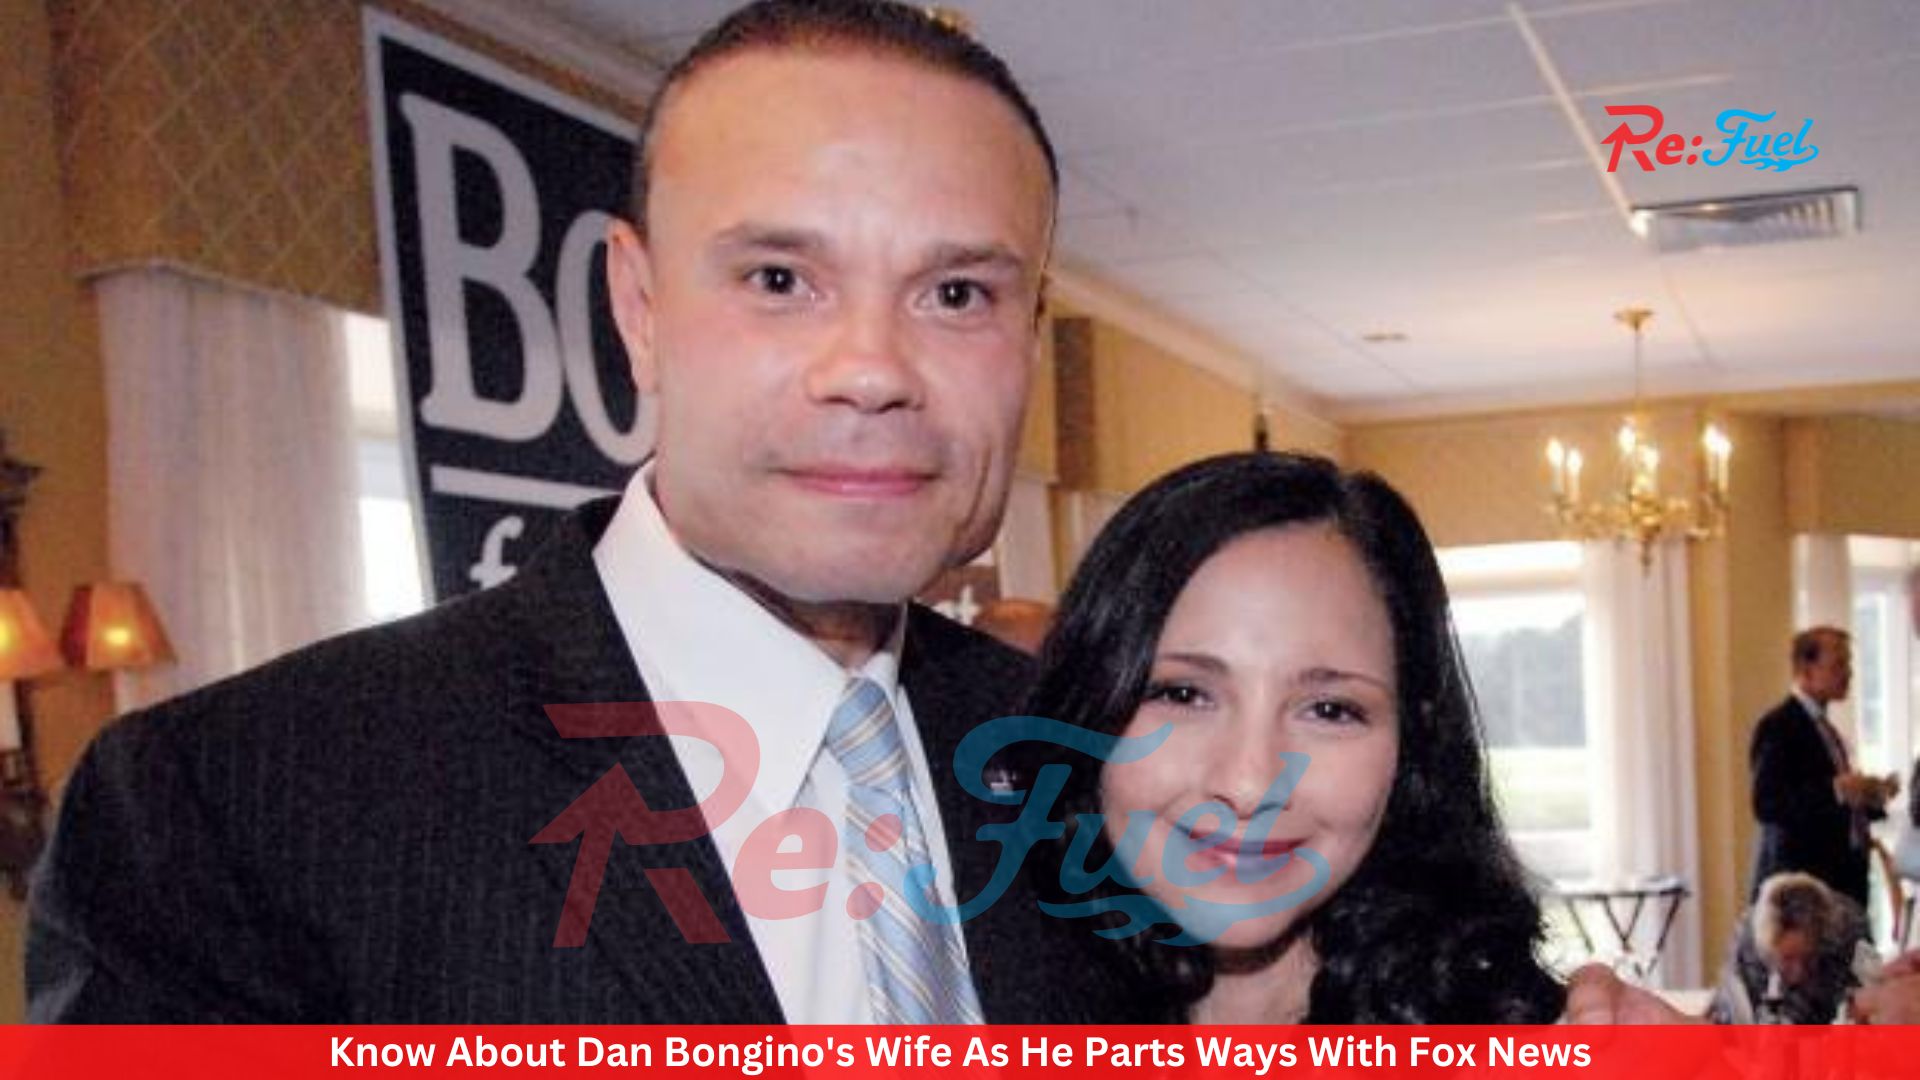 Know About Dan Bongino's Wife As He Parts Ways With Fox News